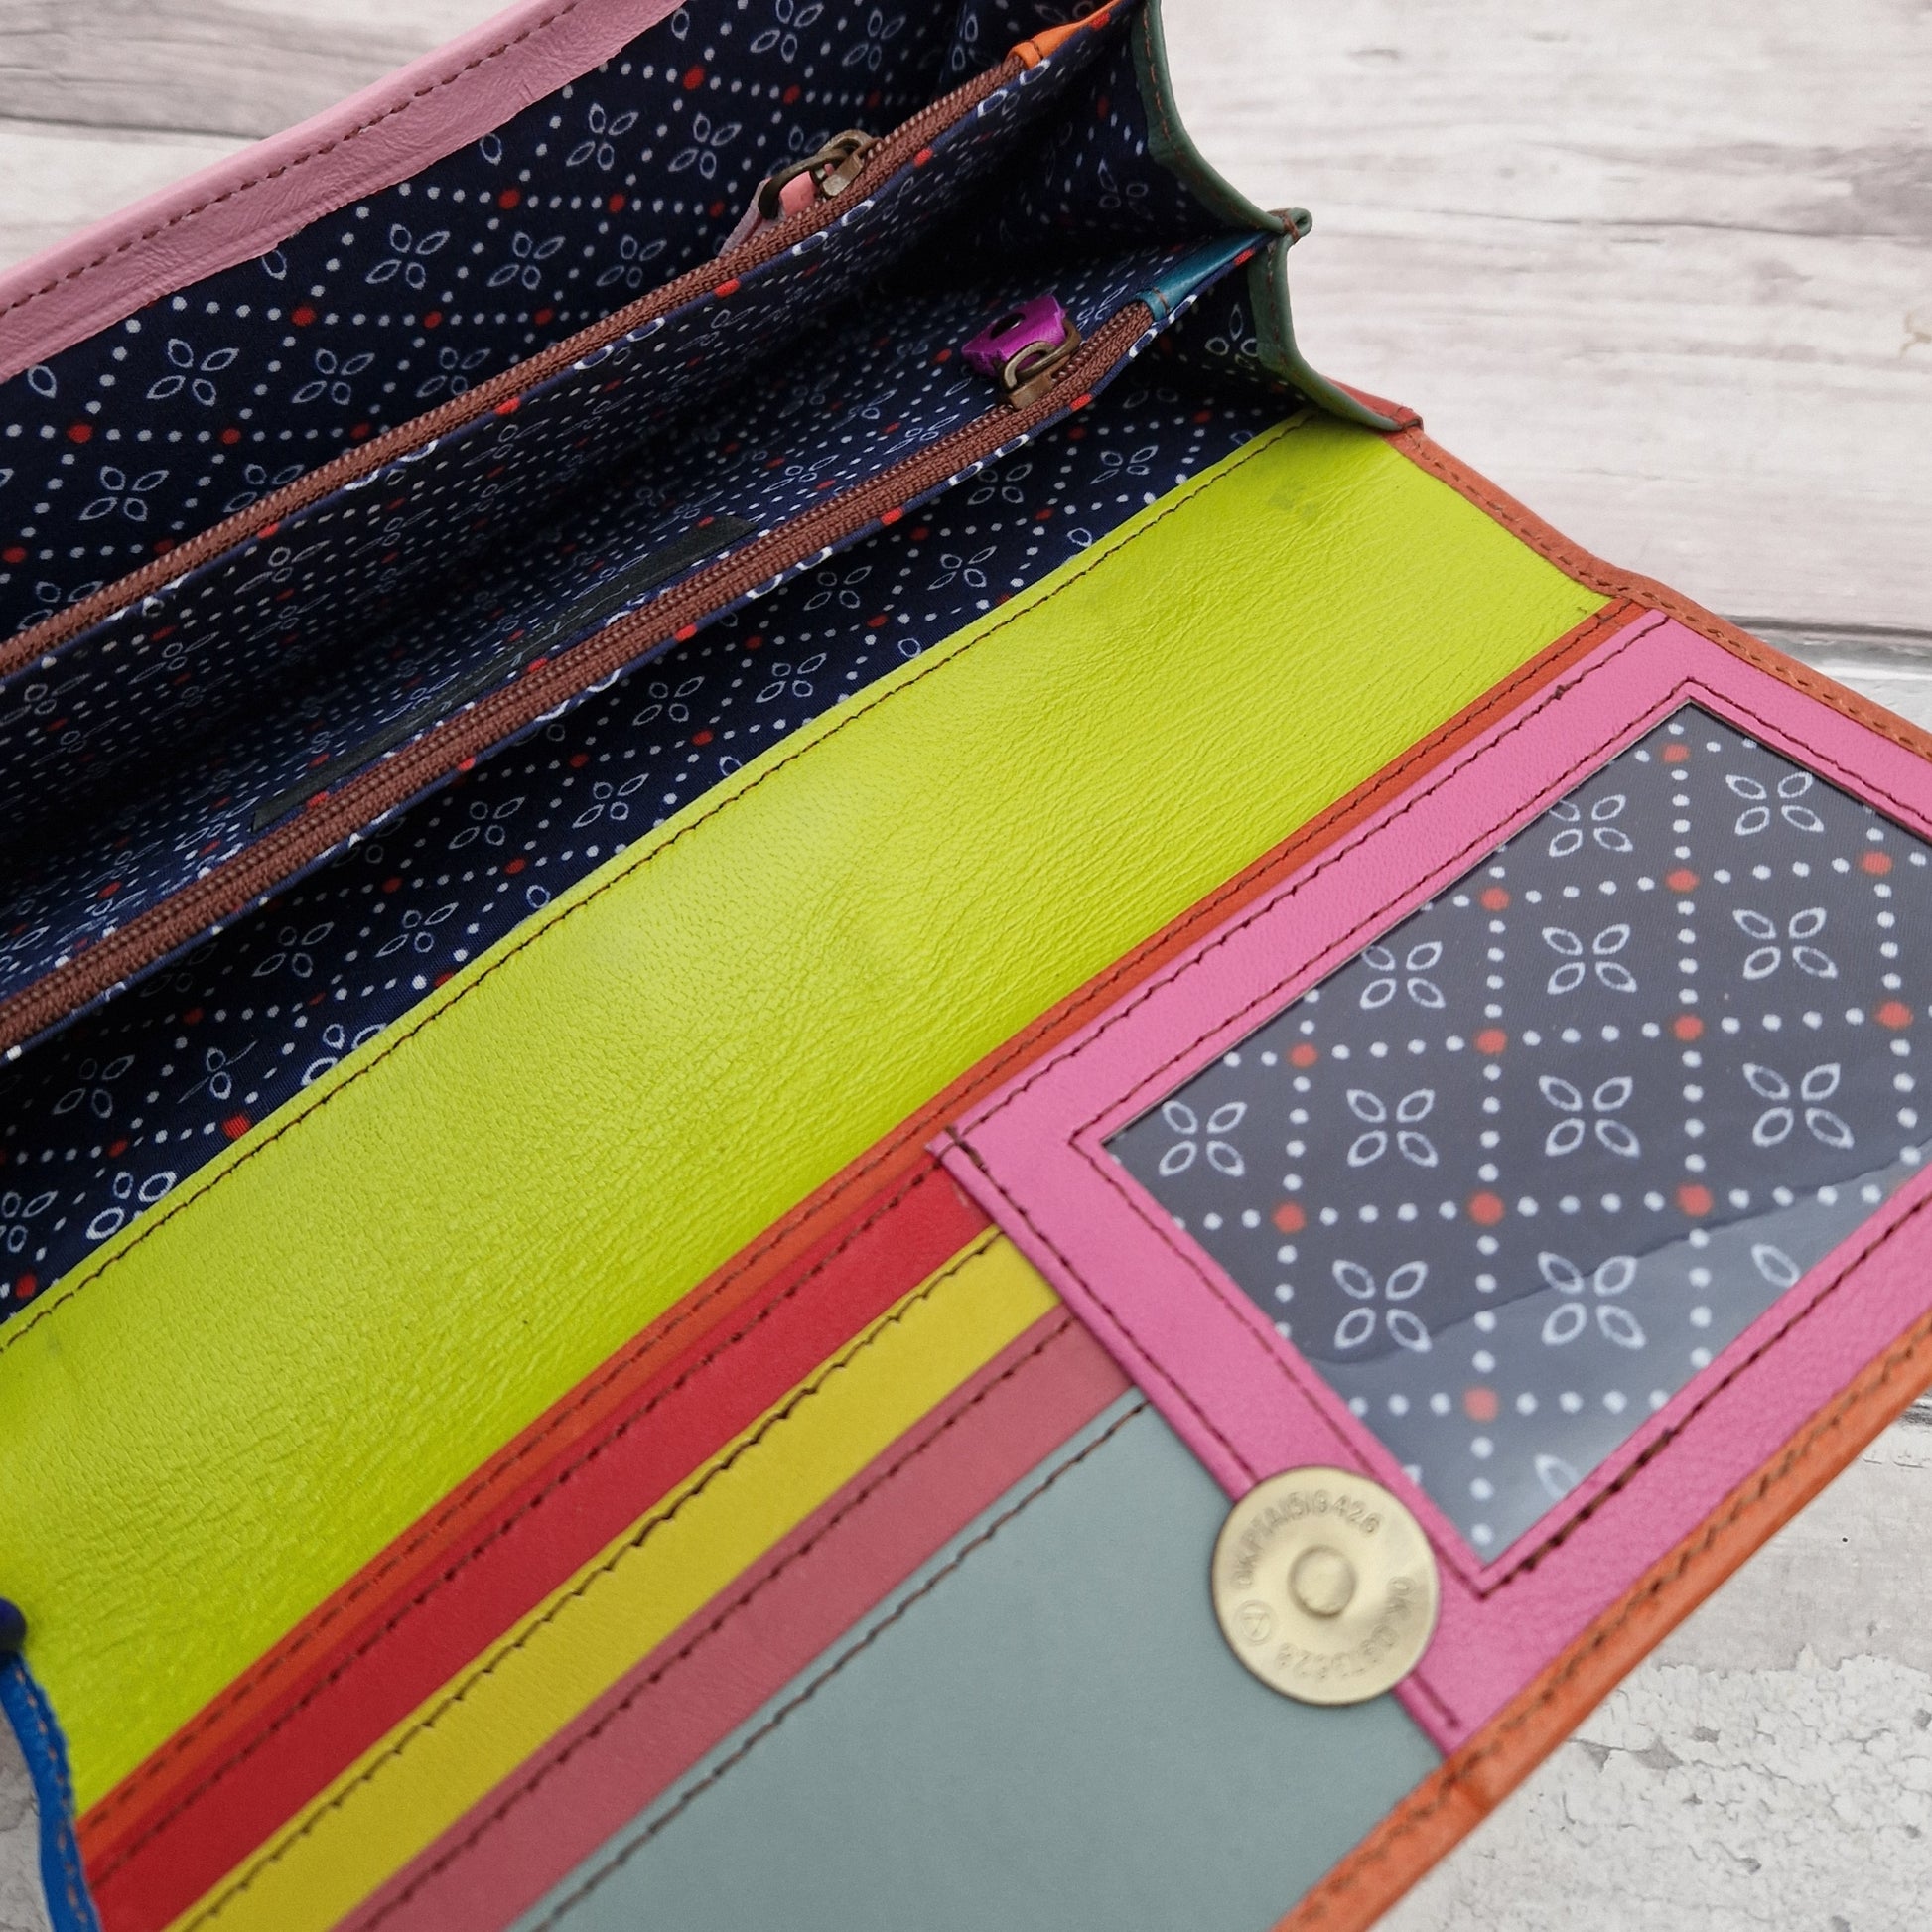 Giraffe print purse made entirely from leather off cuts in a rainbow of colours.